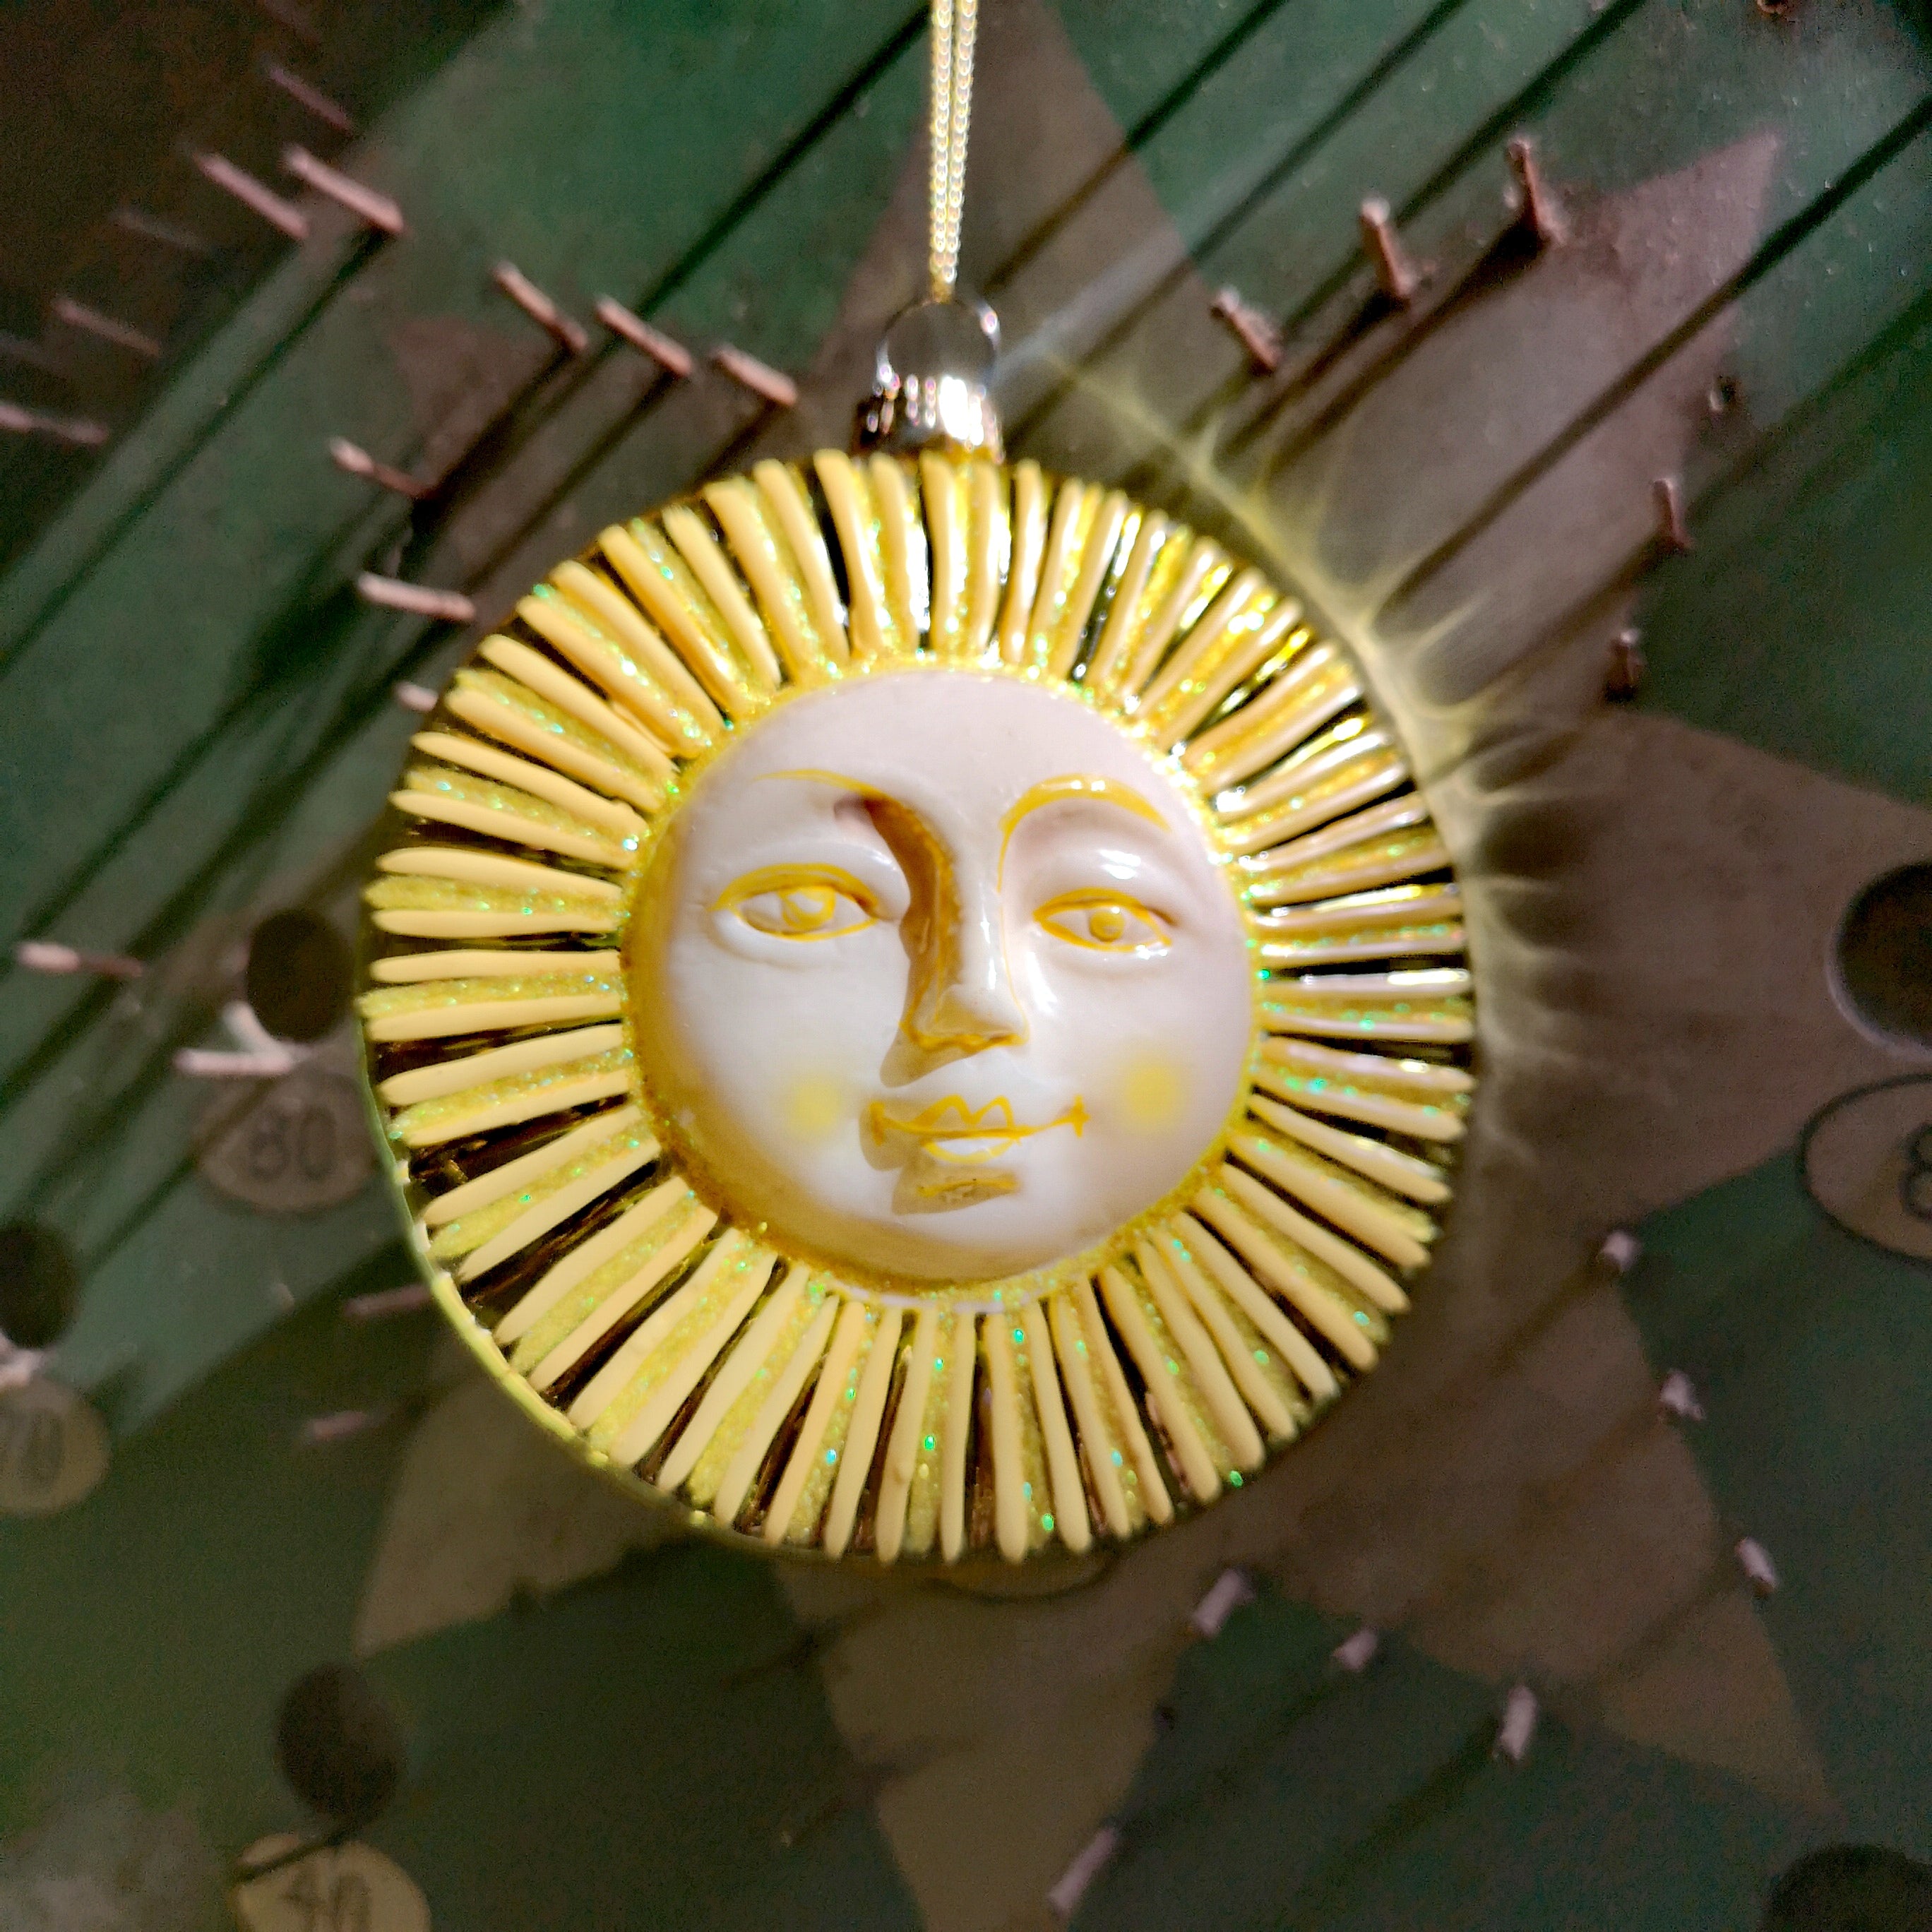 Blissful Sun decoration by Cody Foster